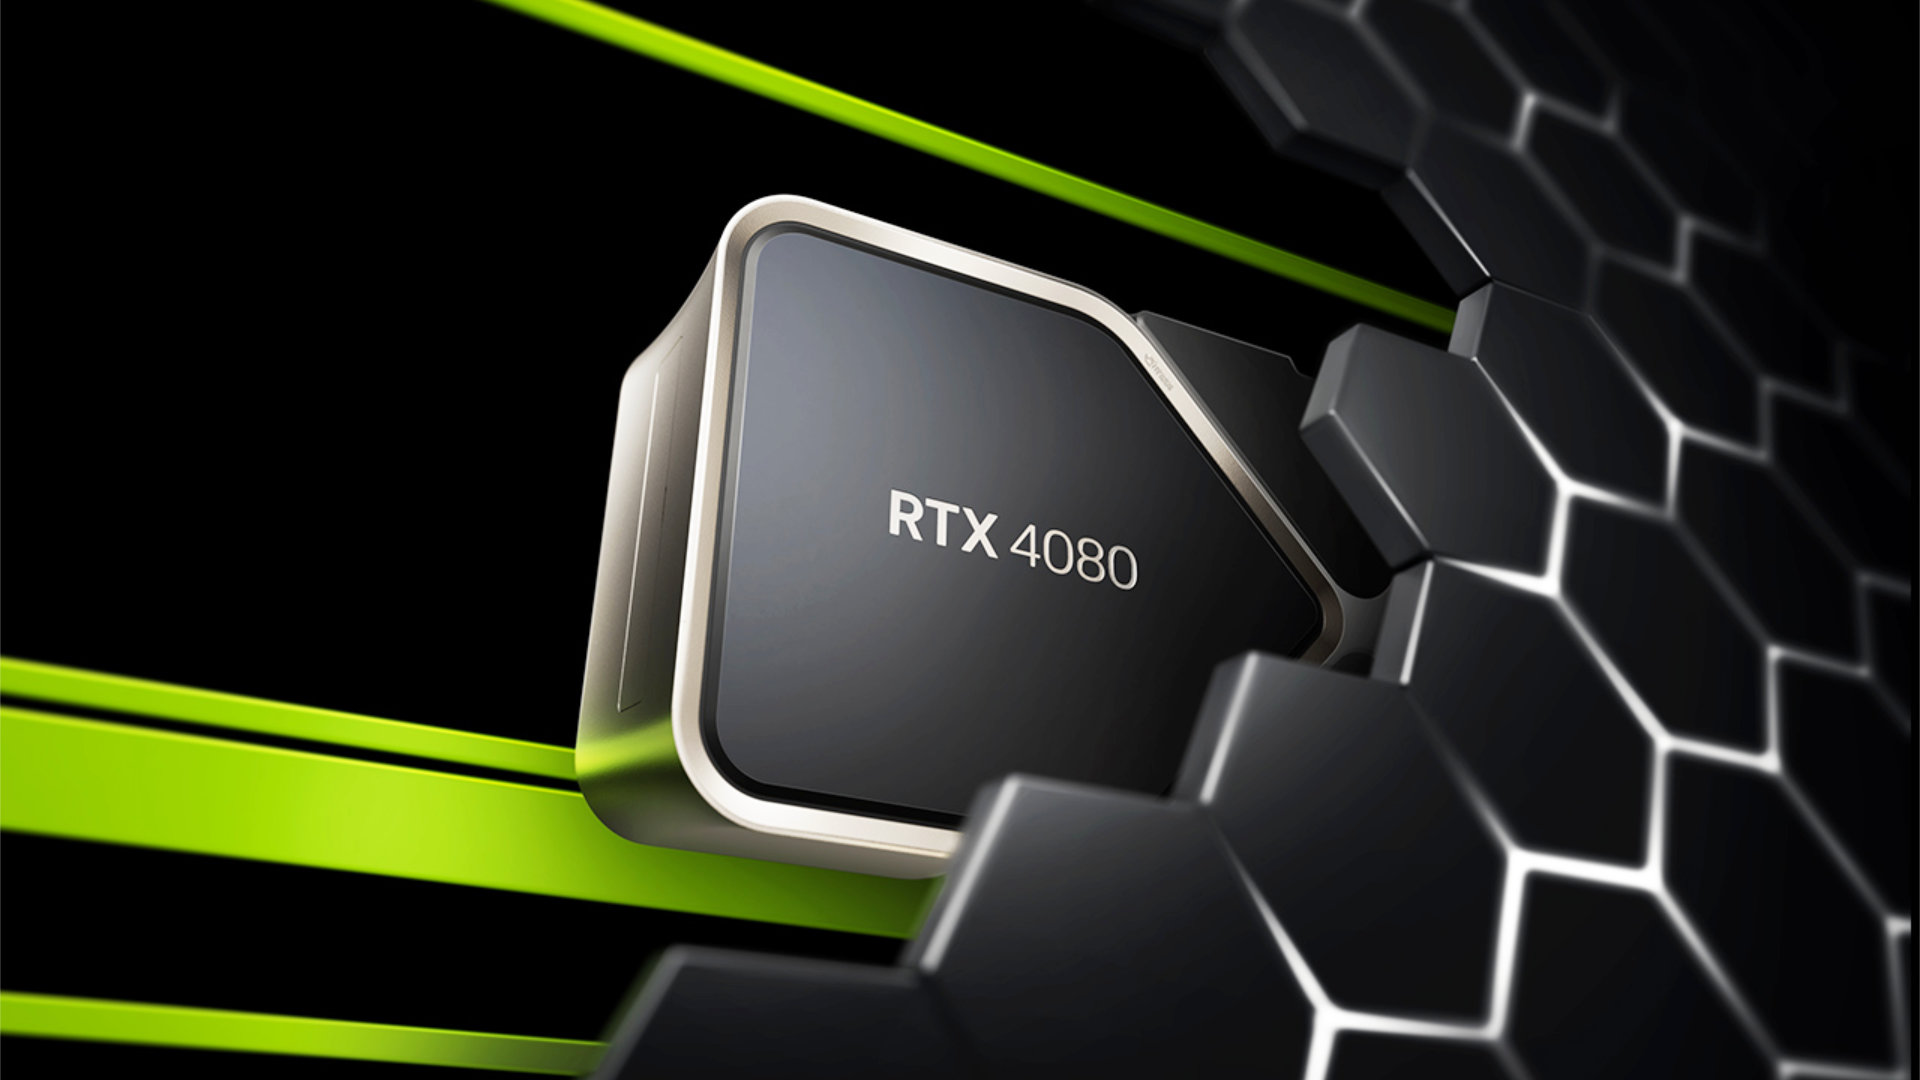 GeForce RTX 4080 Super will get 20 GB of memory, but there will be